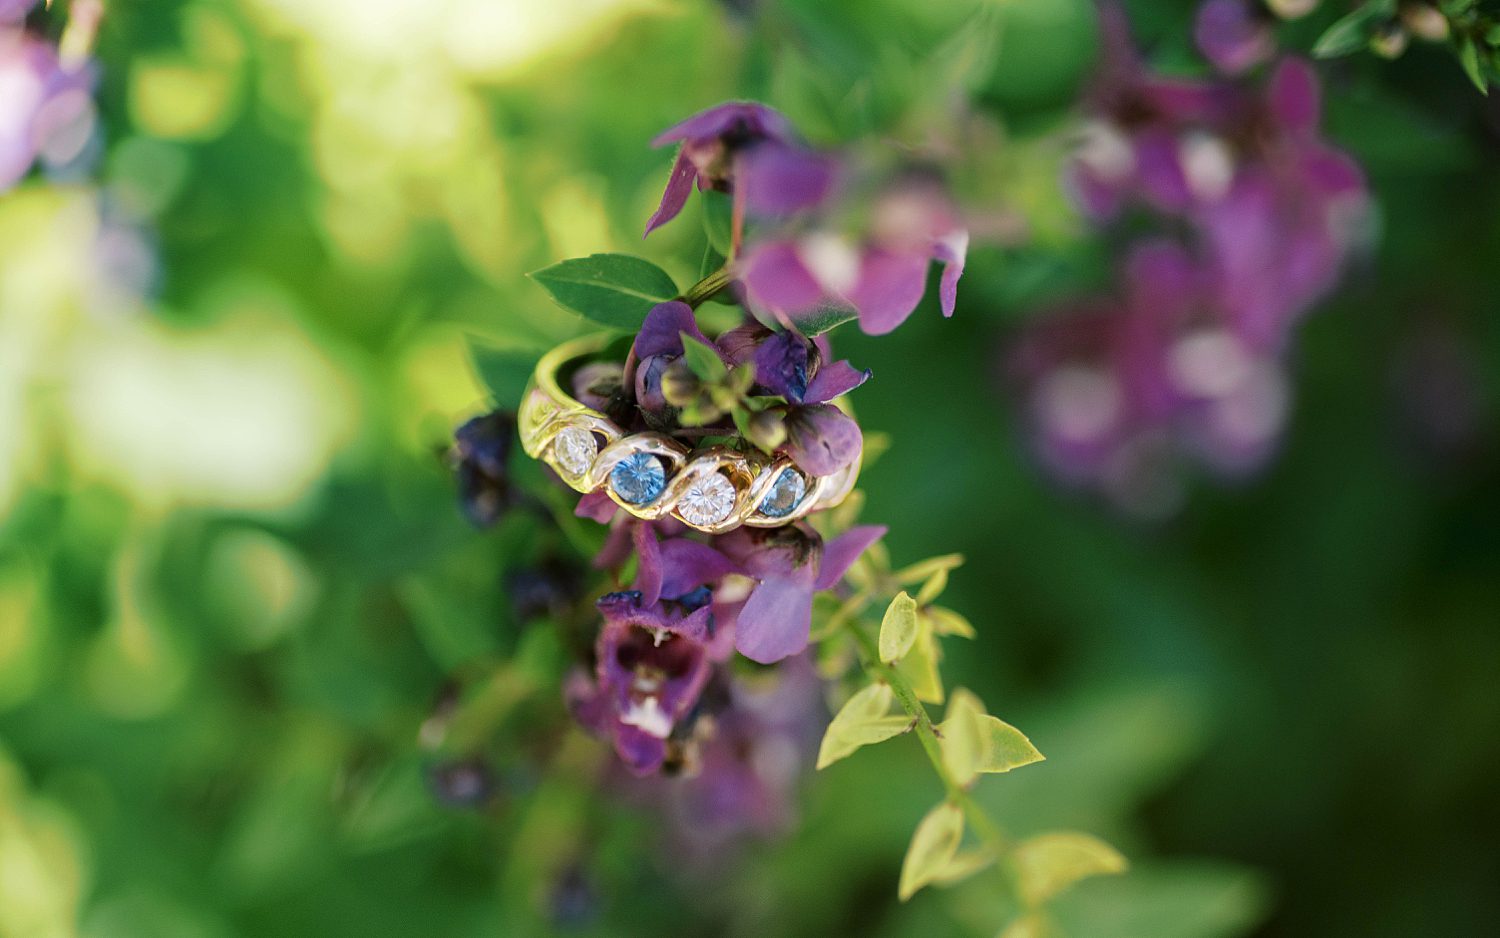 diamond and sapphire ring rests on purple flowers